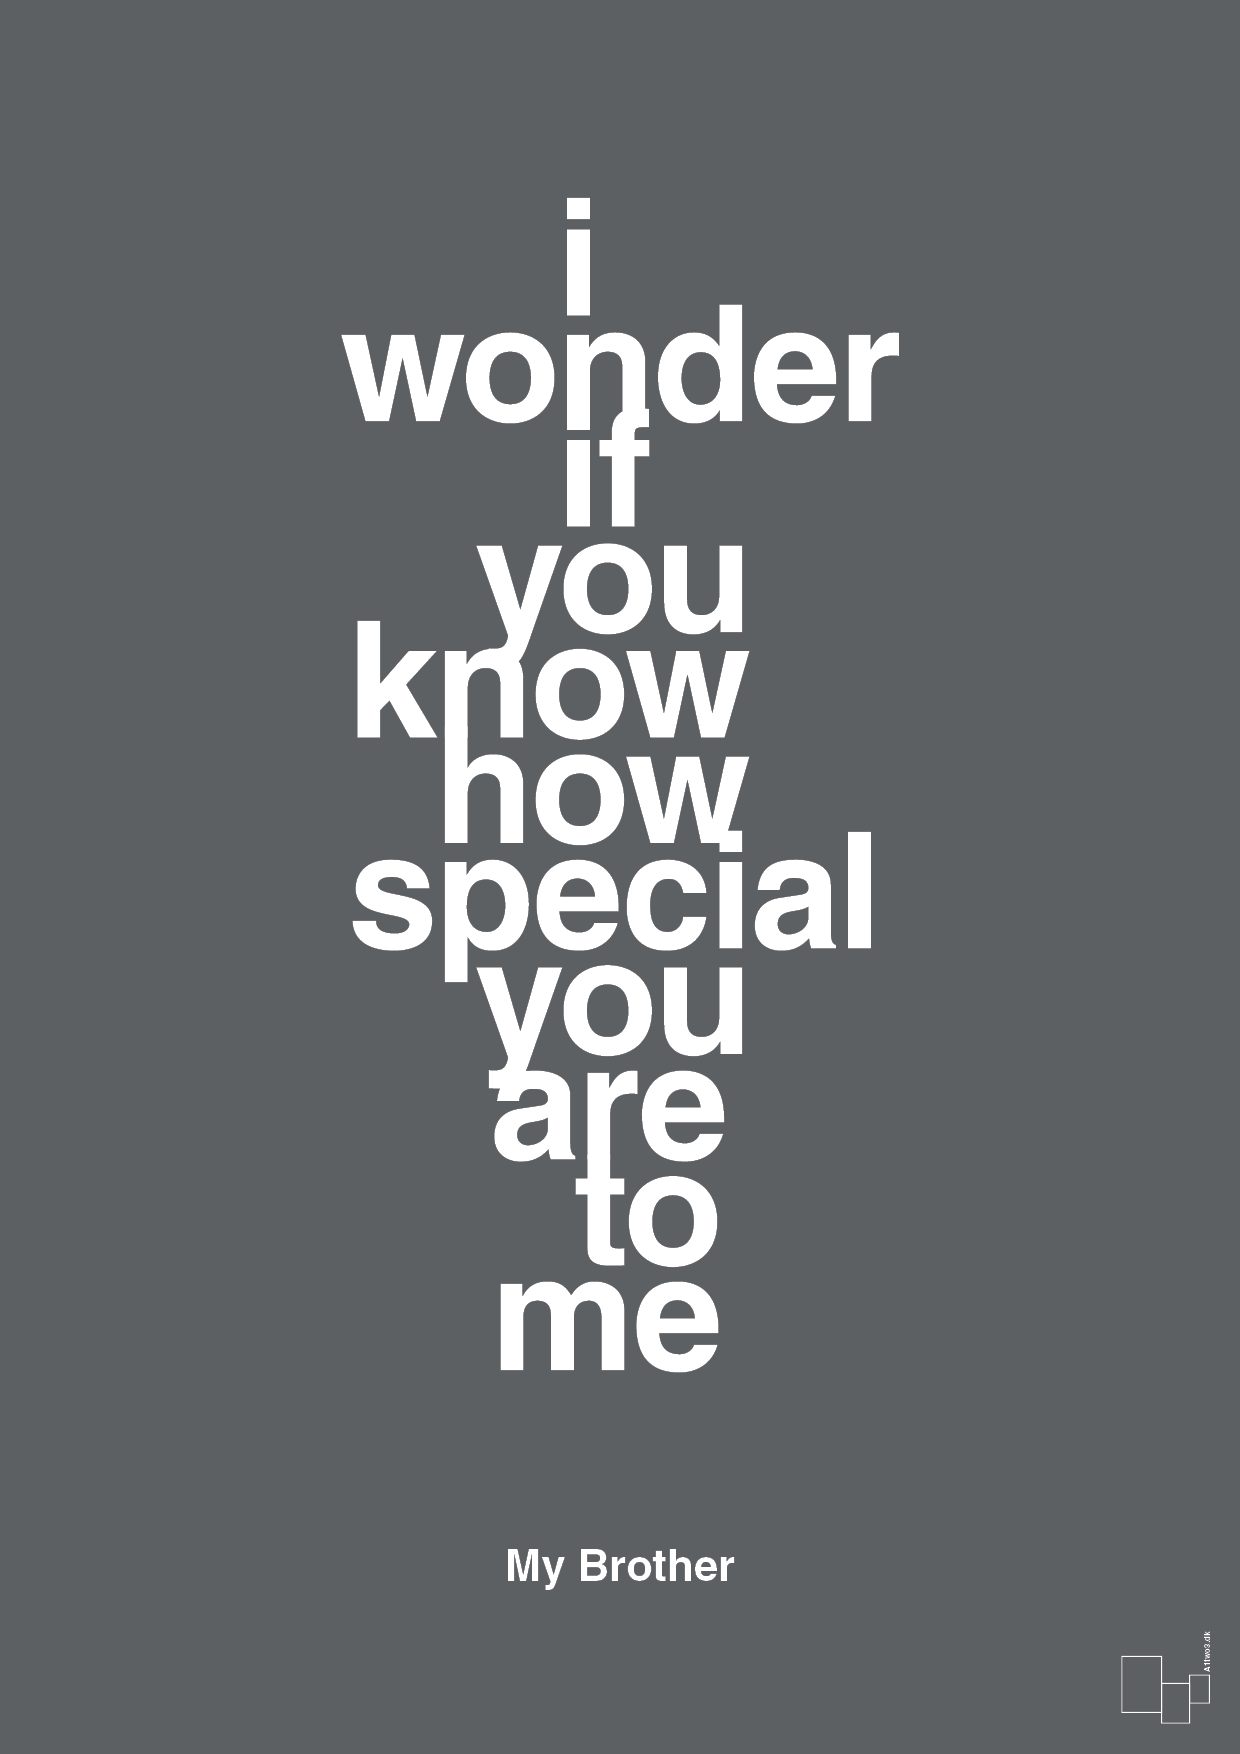 my brother - i wonder if you know how special you are to me - Plakat med Citater i Graphic Charcoal